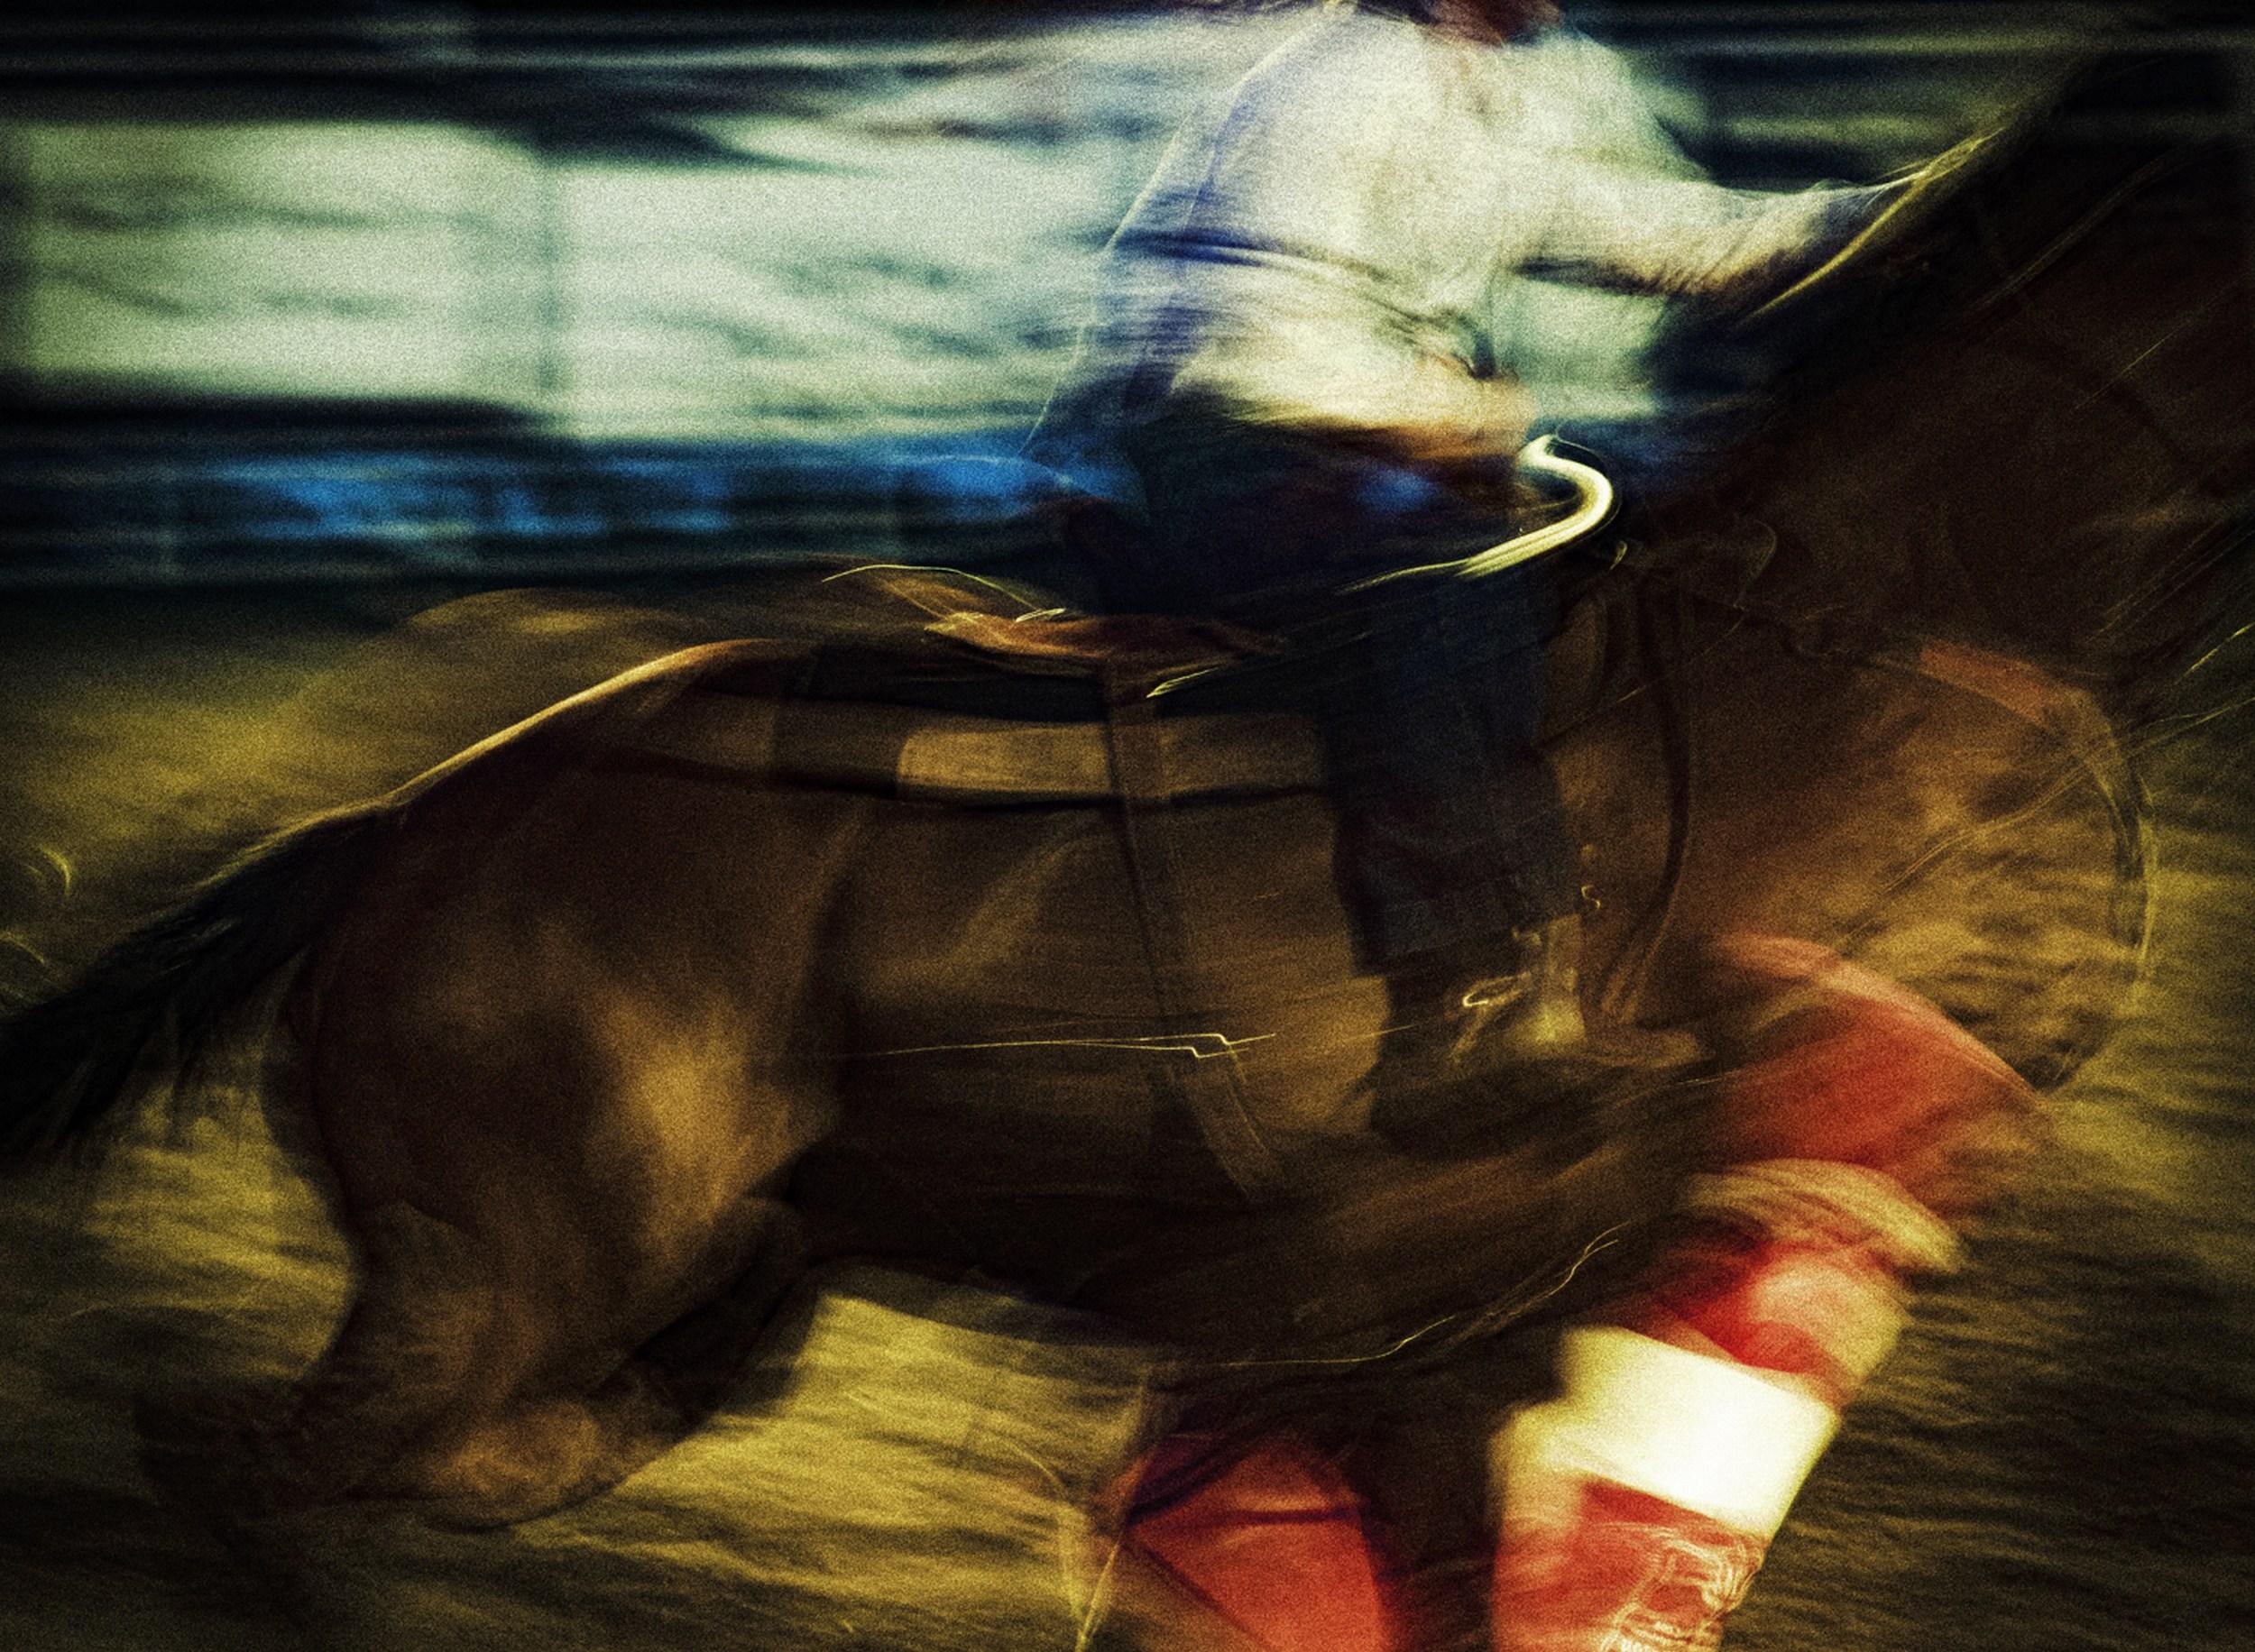 Jeffrey Tamblyn Abstract Photograph - Sturdy (rodeo, horse, motion blur, kinetic, colorful)